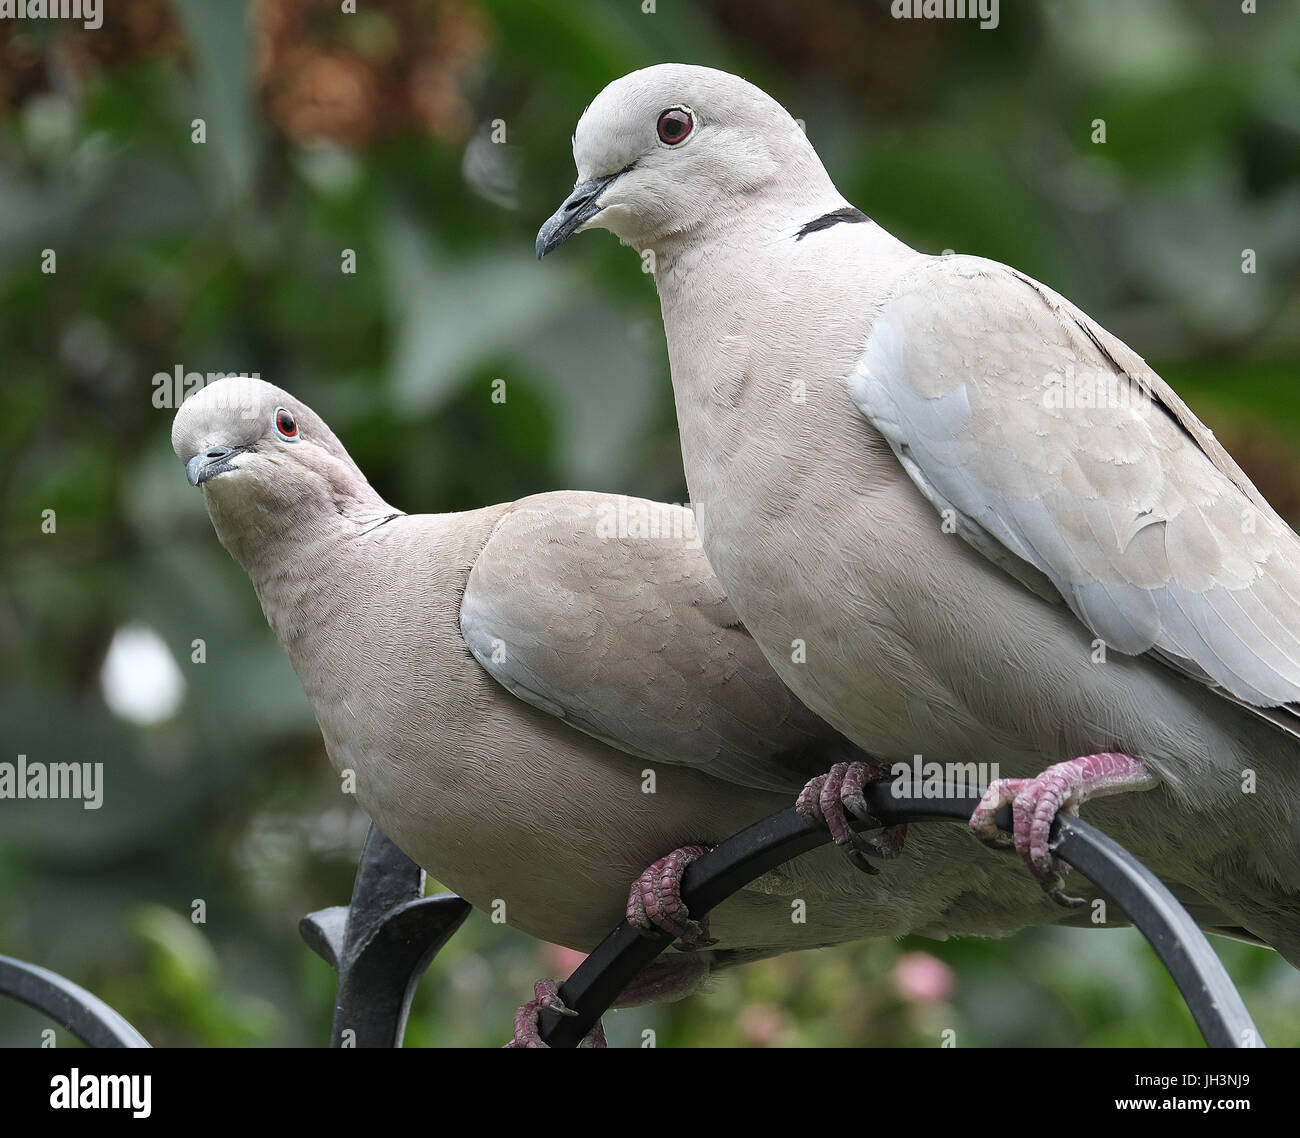 Ring Neck or Collared dove in house garden. Stock Photo